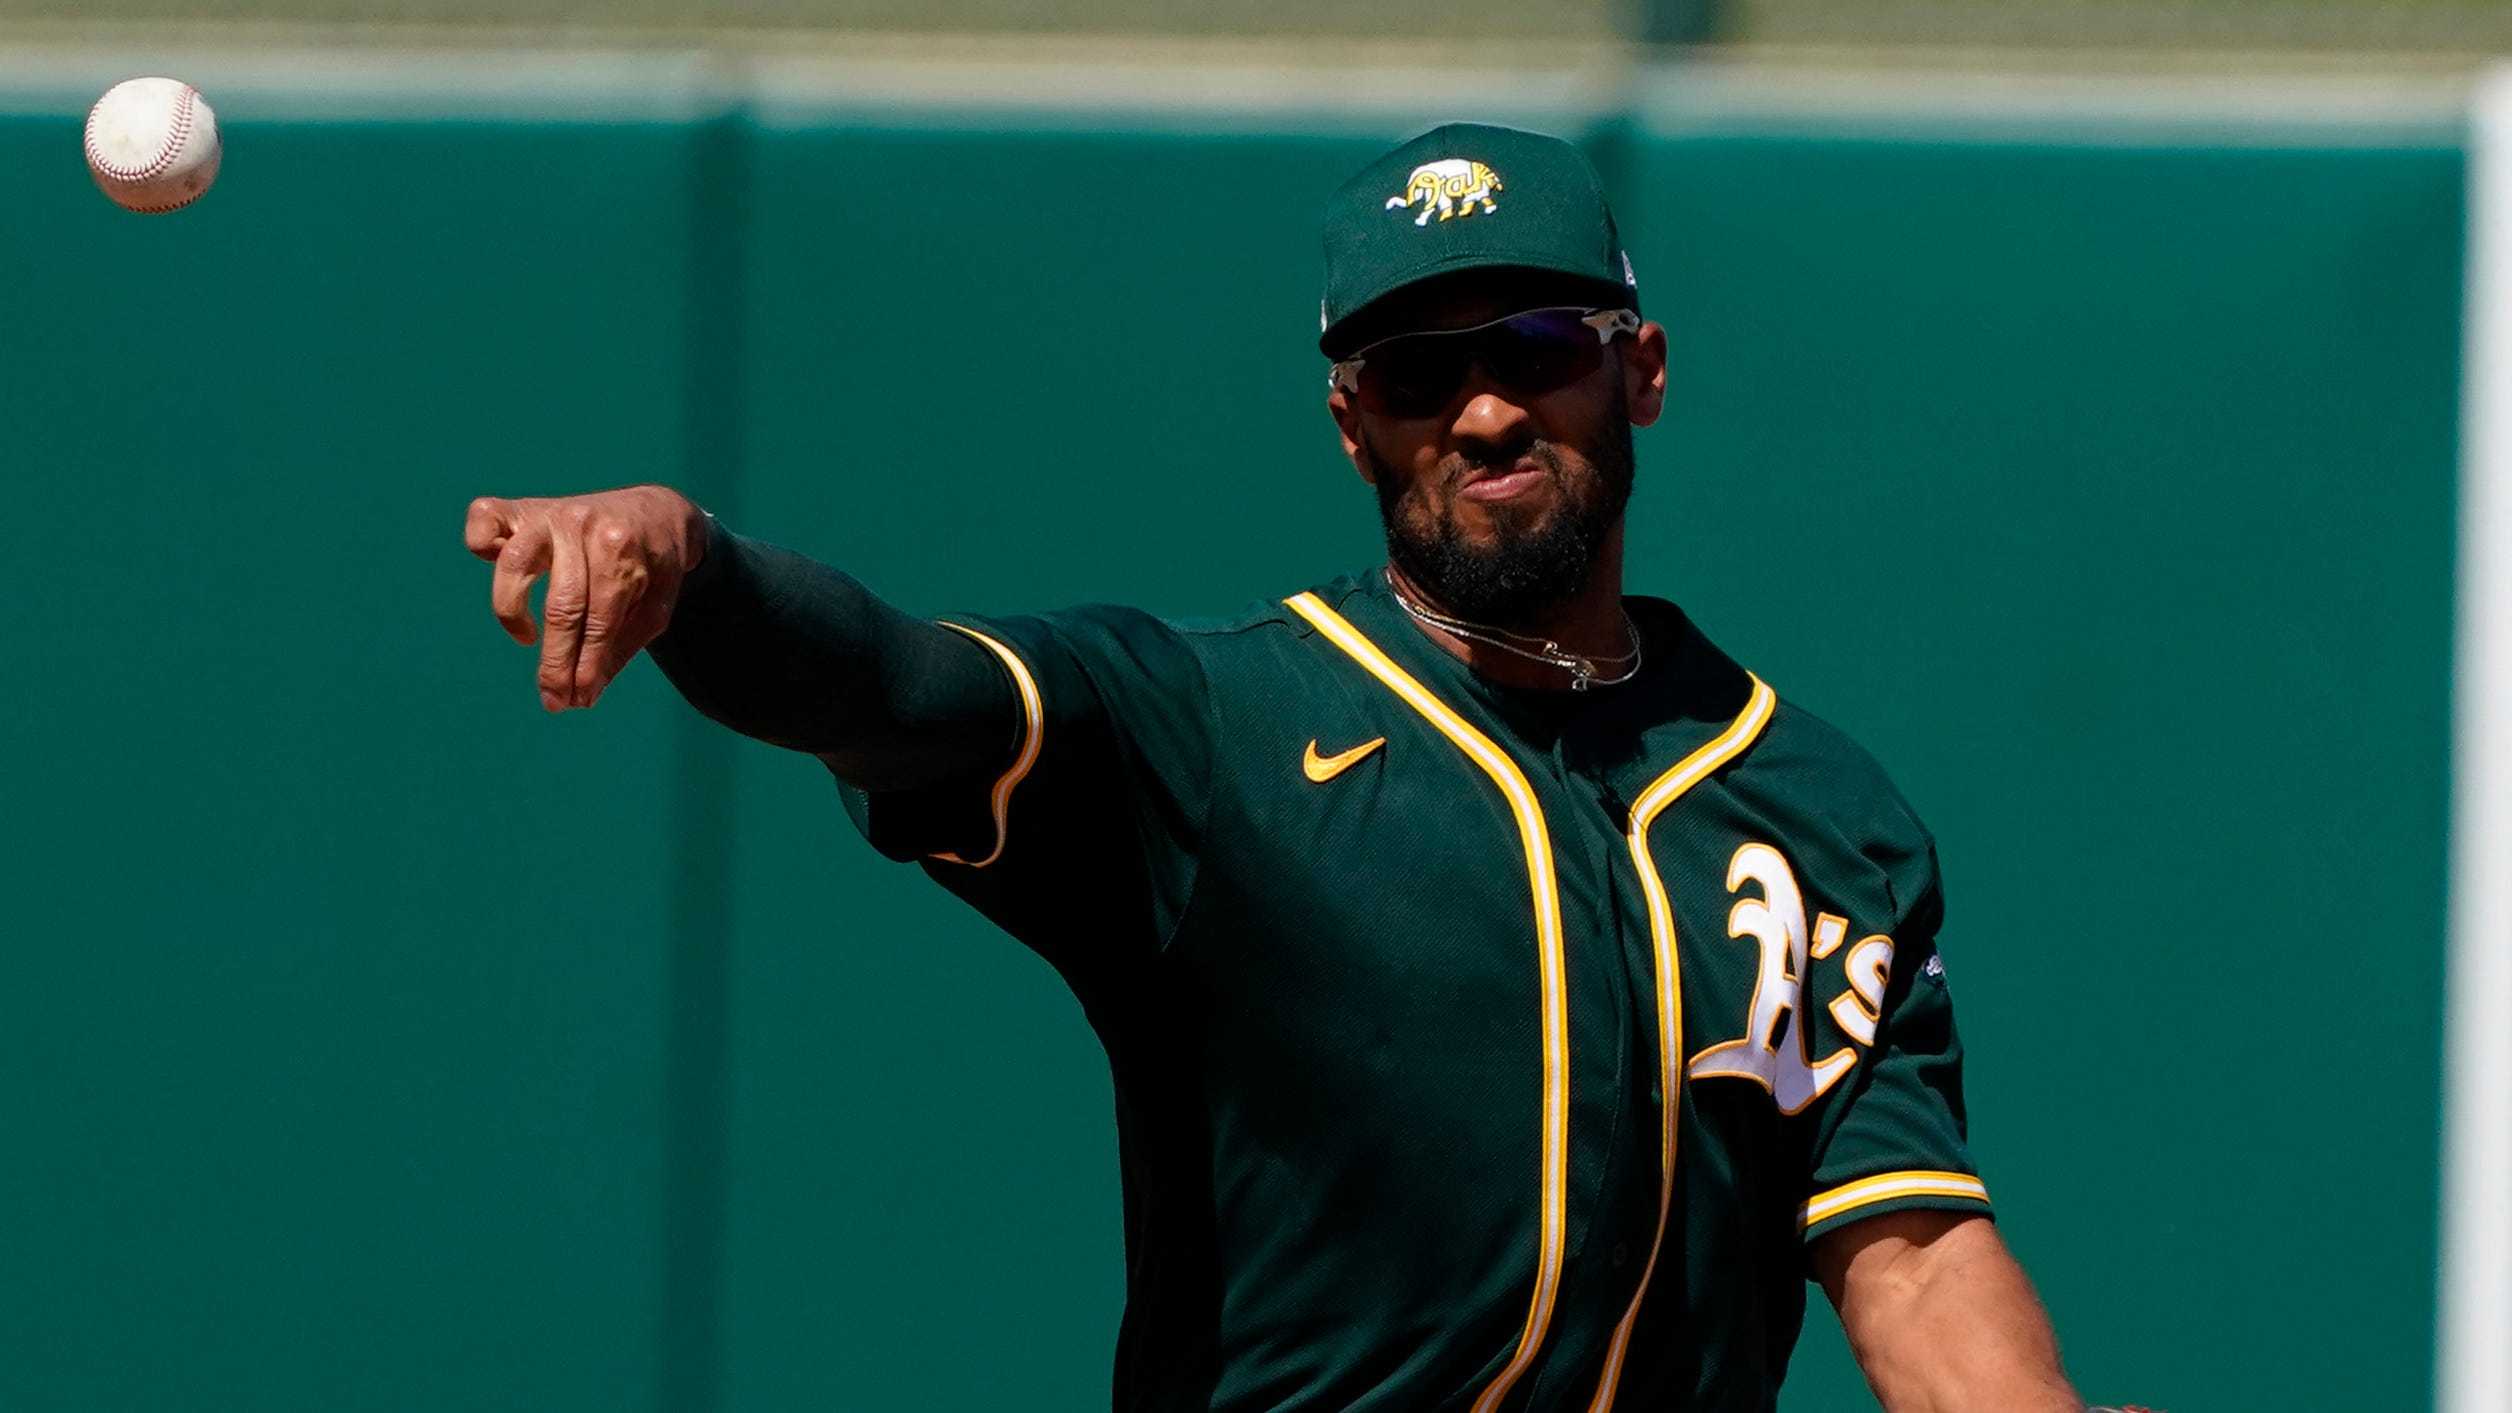  MLB Hot Stove Roundup: Jays nab Semien, J.T. re-ups in Philly.